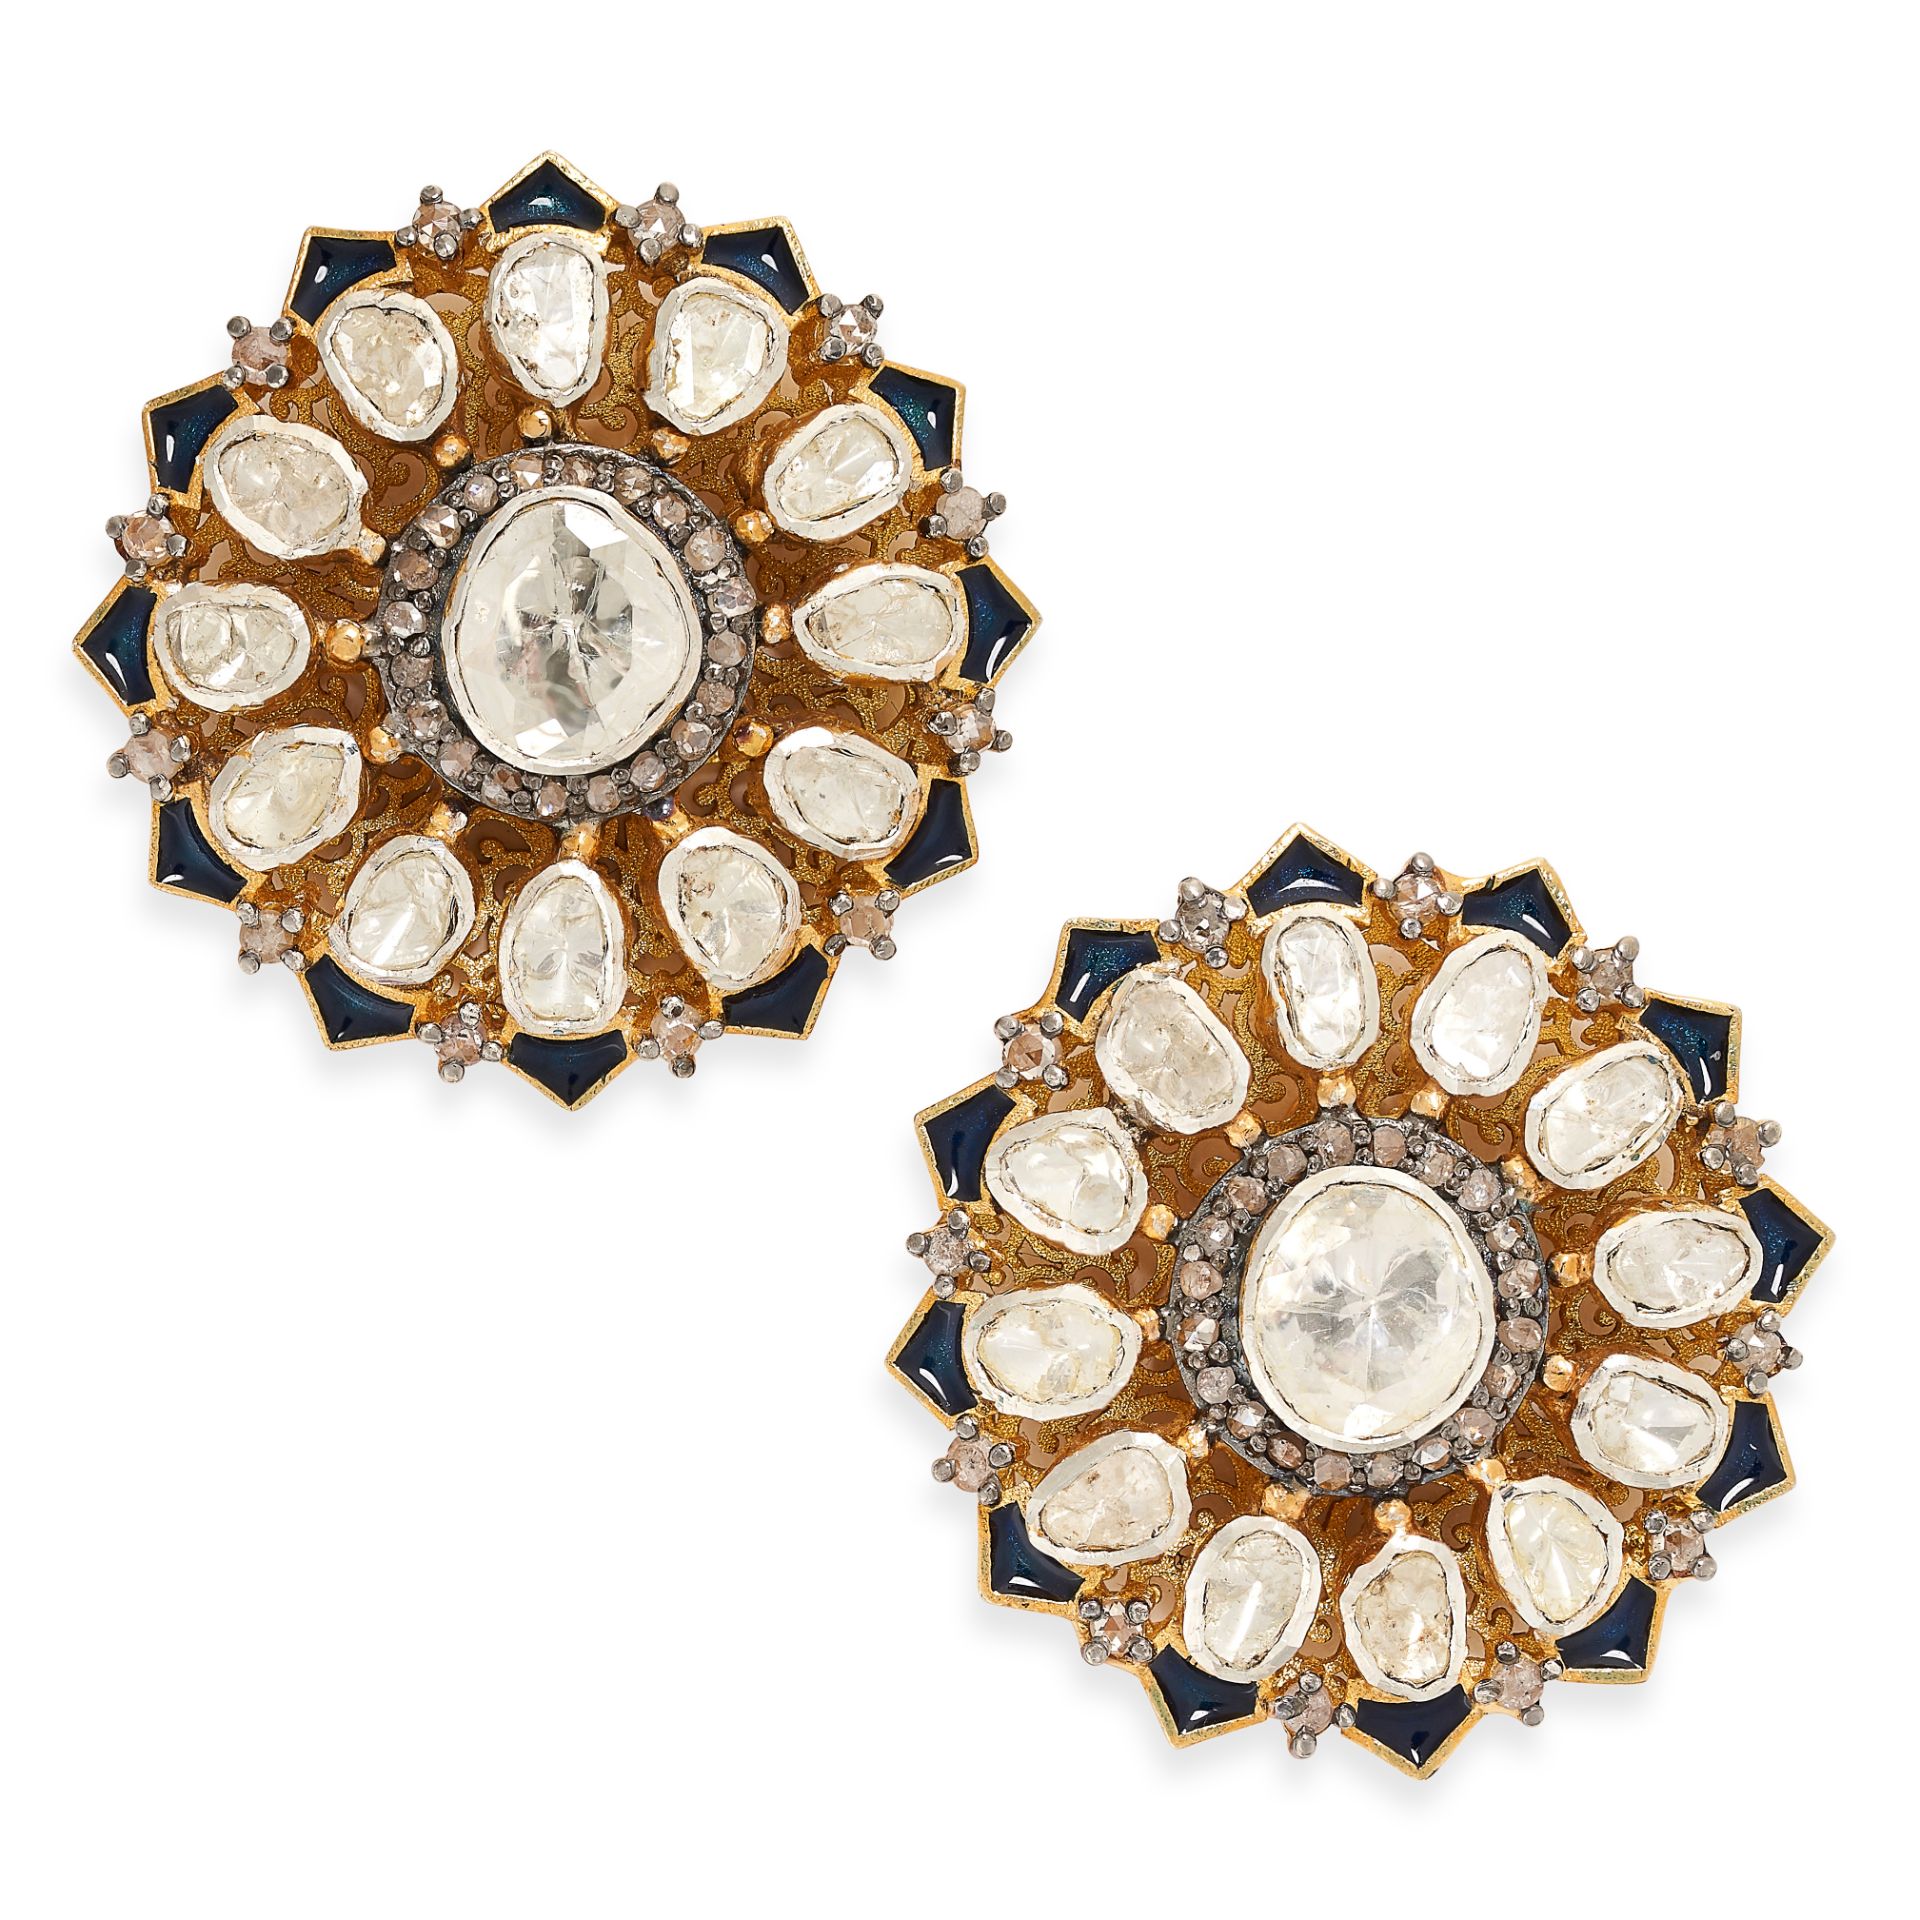 A PAIR OF DIAMOND AND ENAMEL EARRINGS designed as flowers, set with flat cut and rose cut diamonds